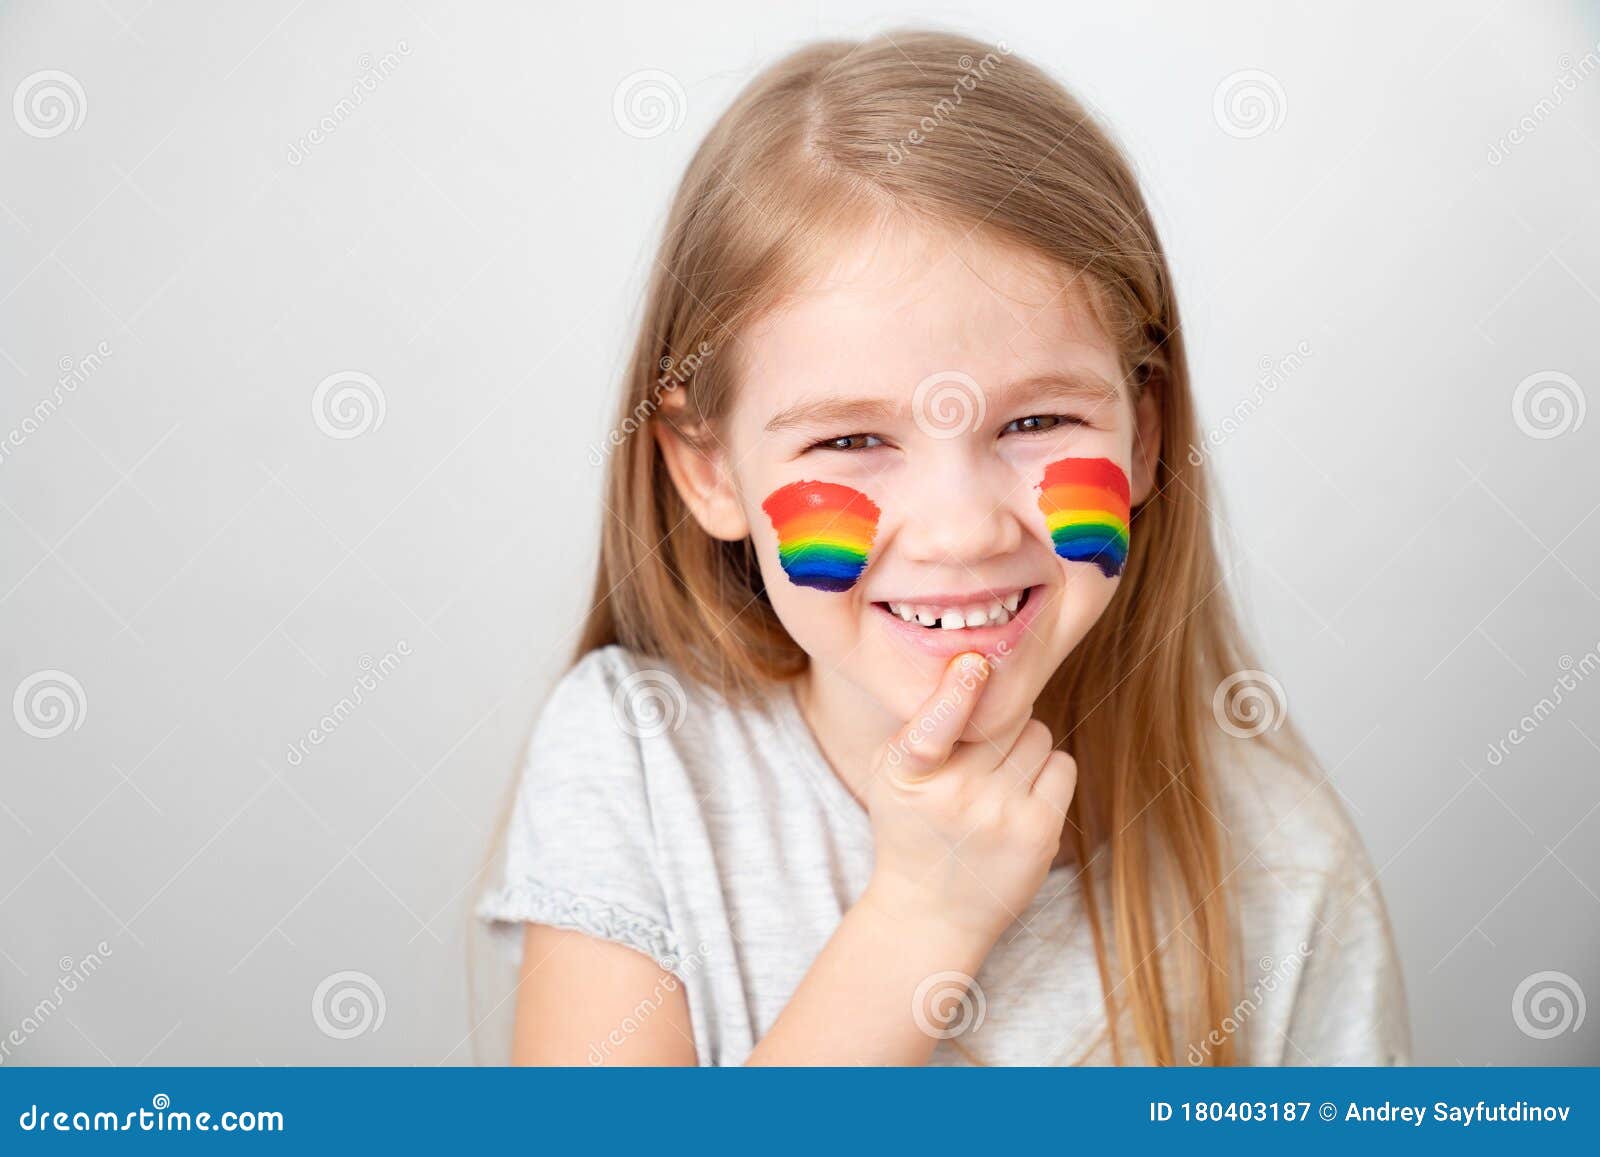 child painted cheeks a rainbow. stay home.